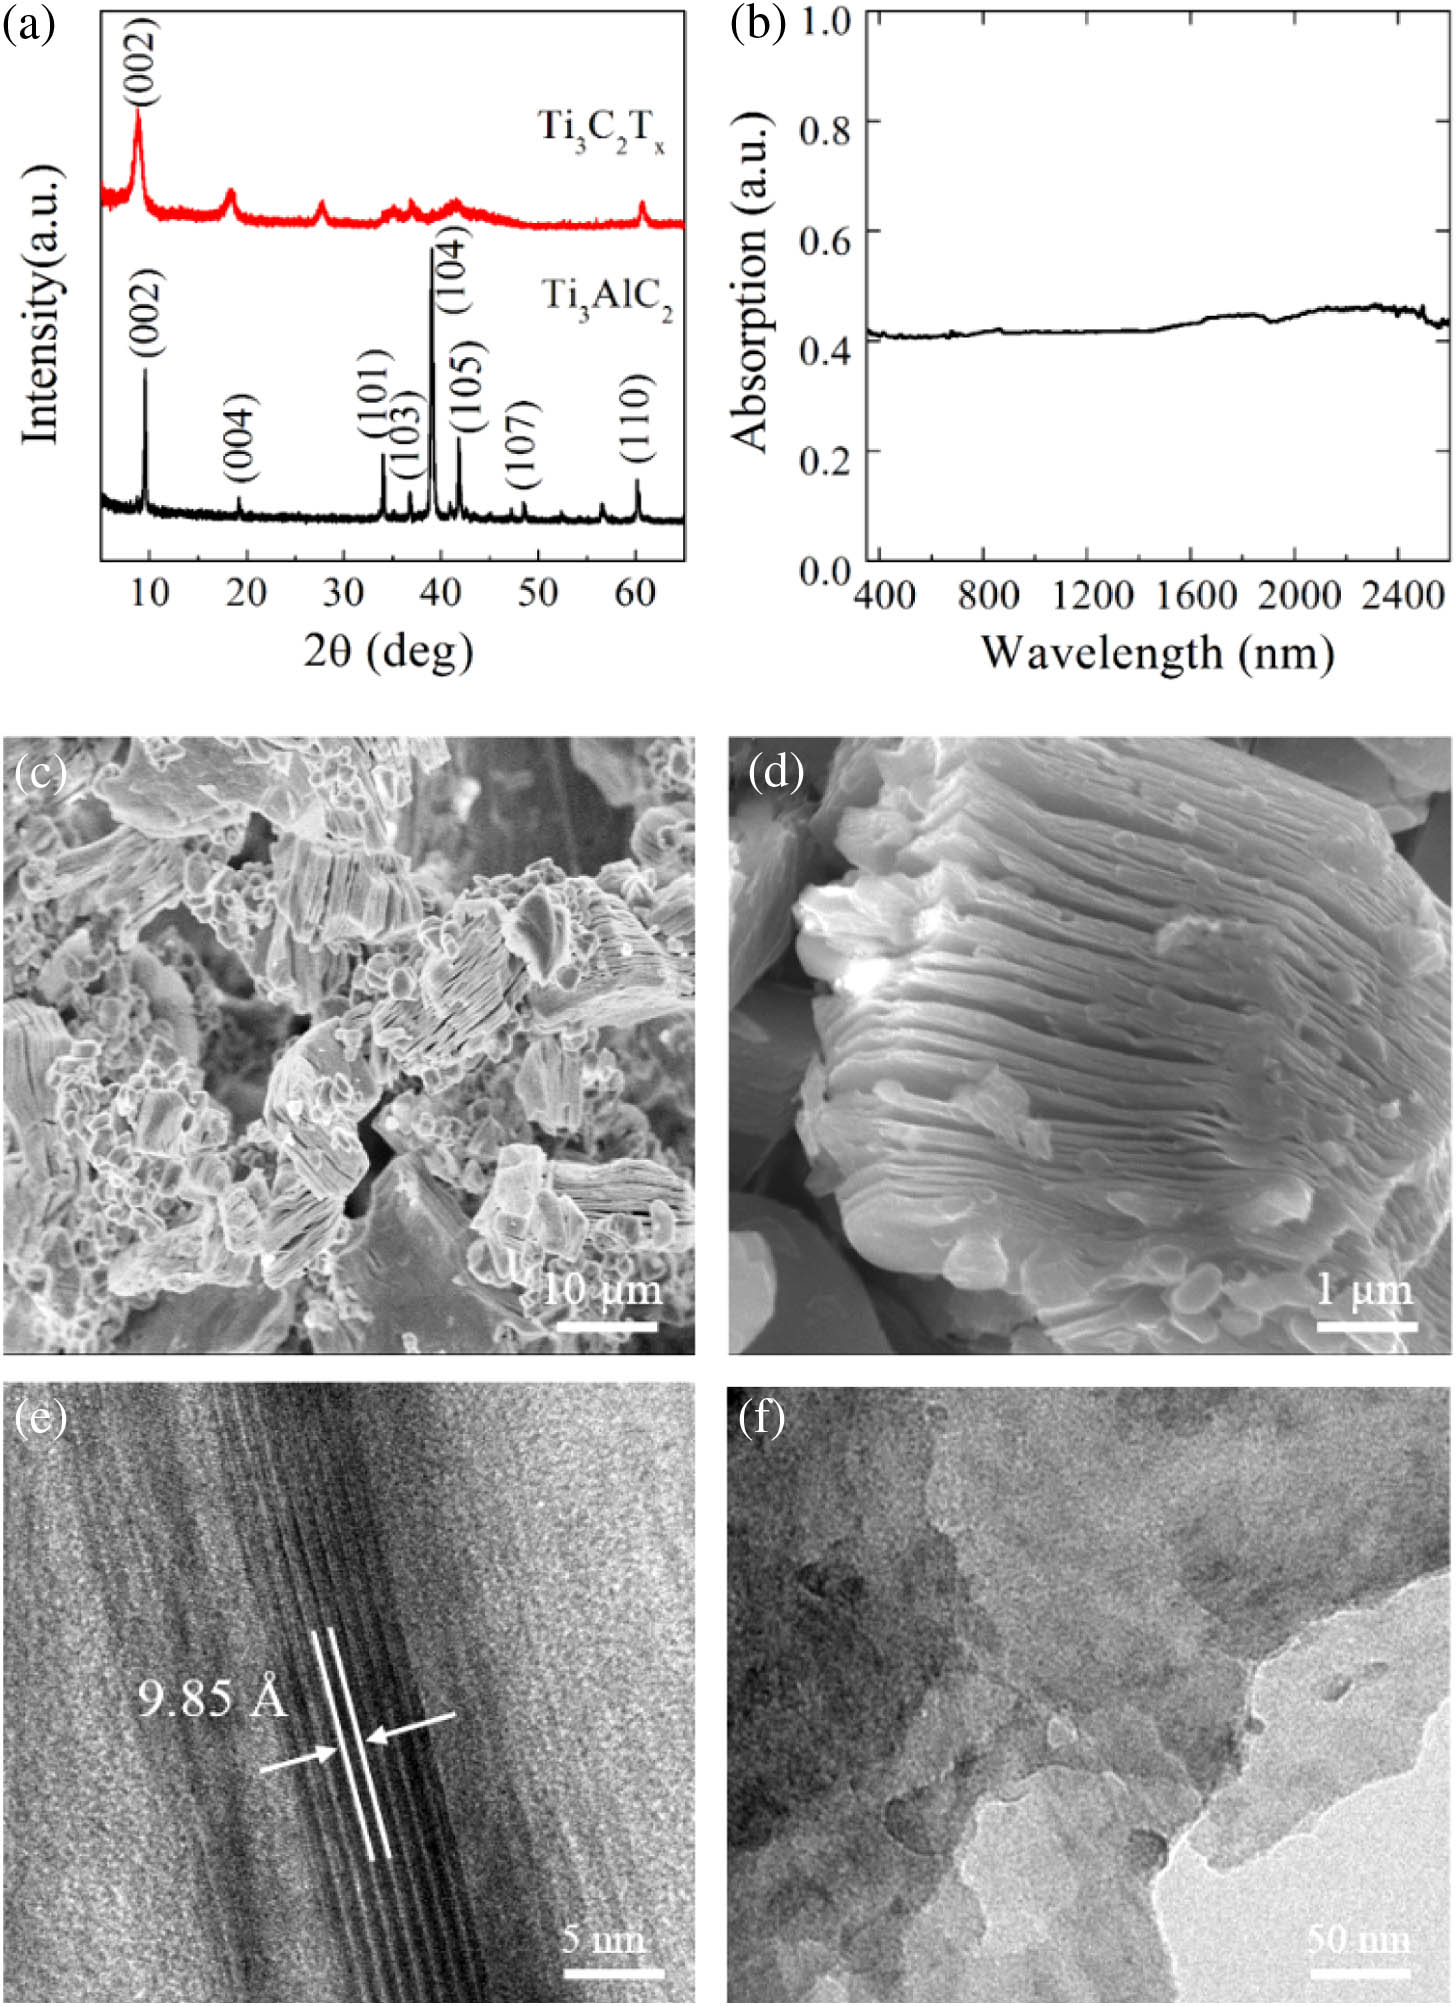 (a) XRD patterns of the Ti3C2Tx and Ti3AlC2. (b) Linear absorption spectrum of Ti3C2Tx. (c), (d) SEM images of delaminated Ti3C2Tx after HF etching under different magnifications. (e) Interlayer distance is measured to be 9.85 Å. (f) TEM image of the Ti3C2Tx flakes.